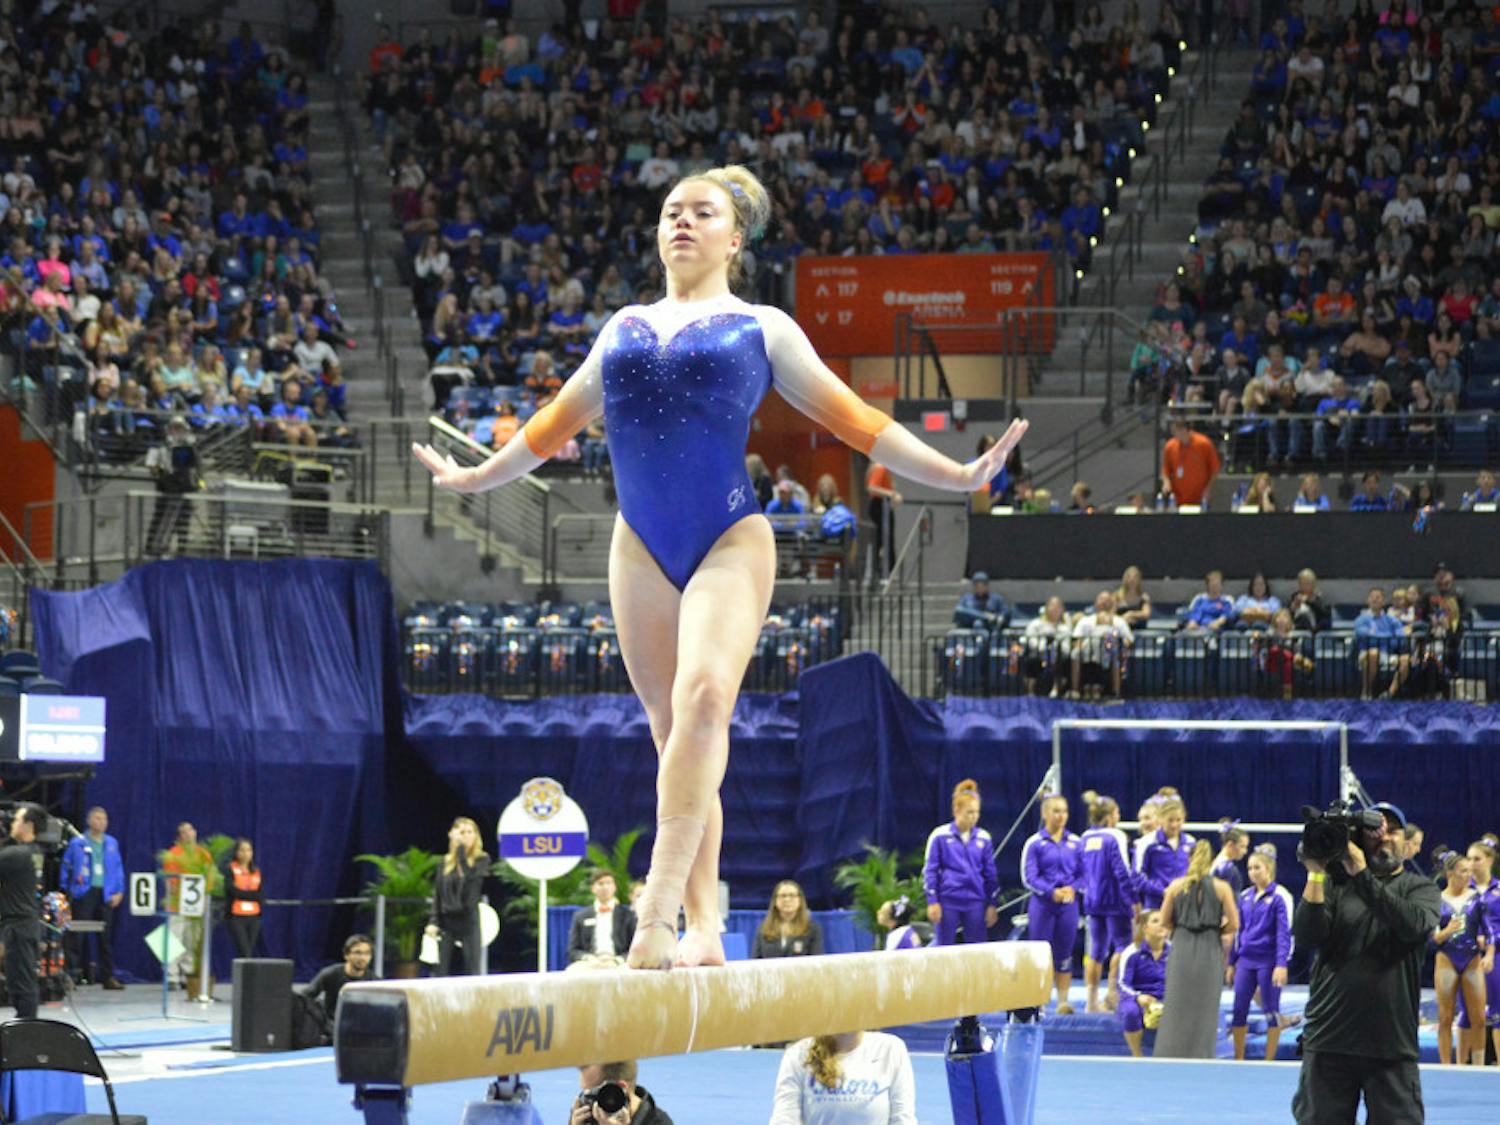 SEC Freshman Gymnast of the Week Jazmyn Foberg is part of a young core that will be a big part of Florida's rotation this season. “These freshmen came in ready to fight, determined and nothing is going to stand in their way,” coach Jenny Rowland said.  